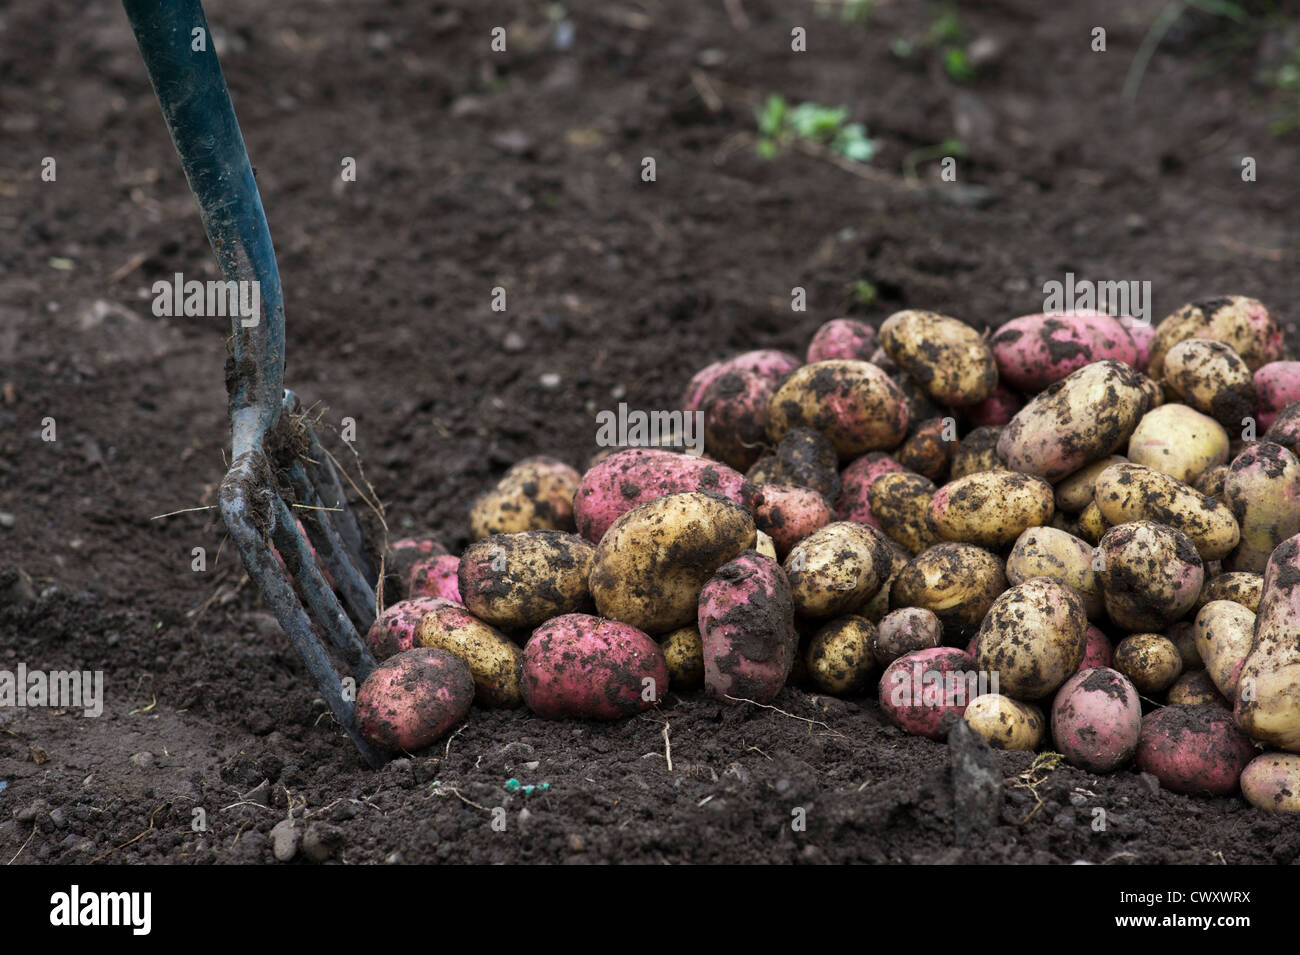 Harvested King Edward and Desiree potatoes in a garden Stock Photo